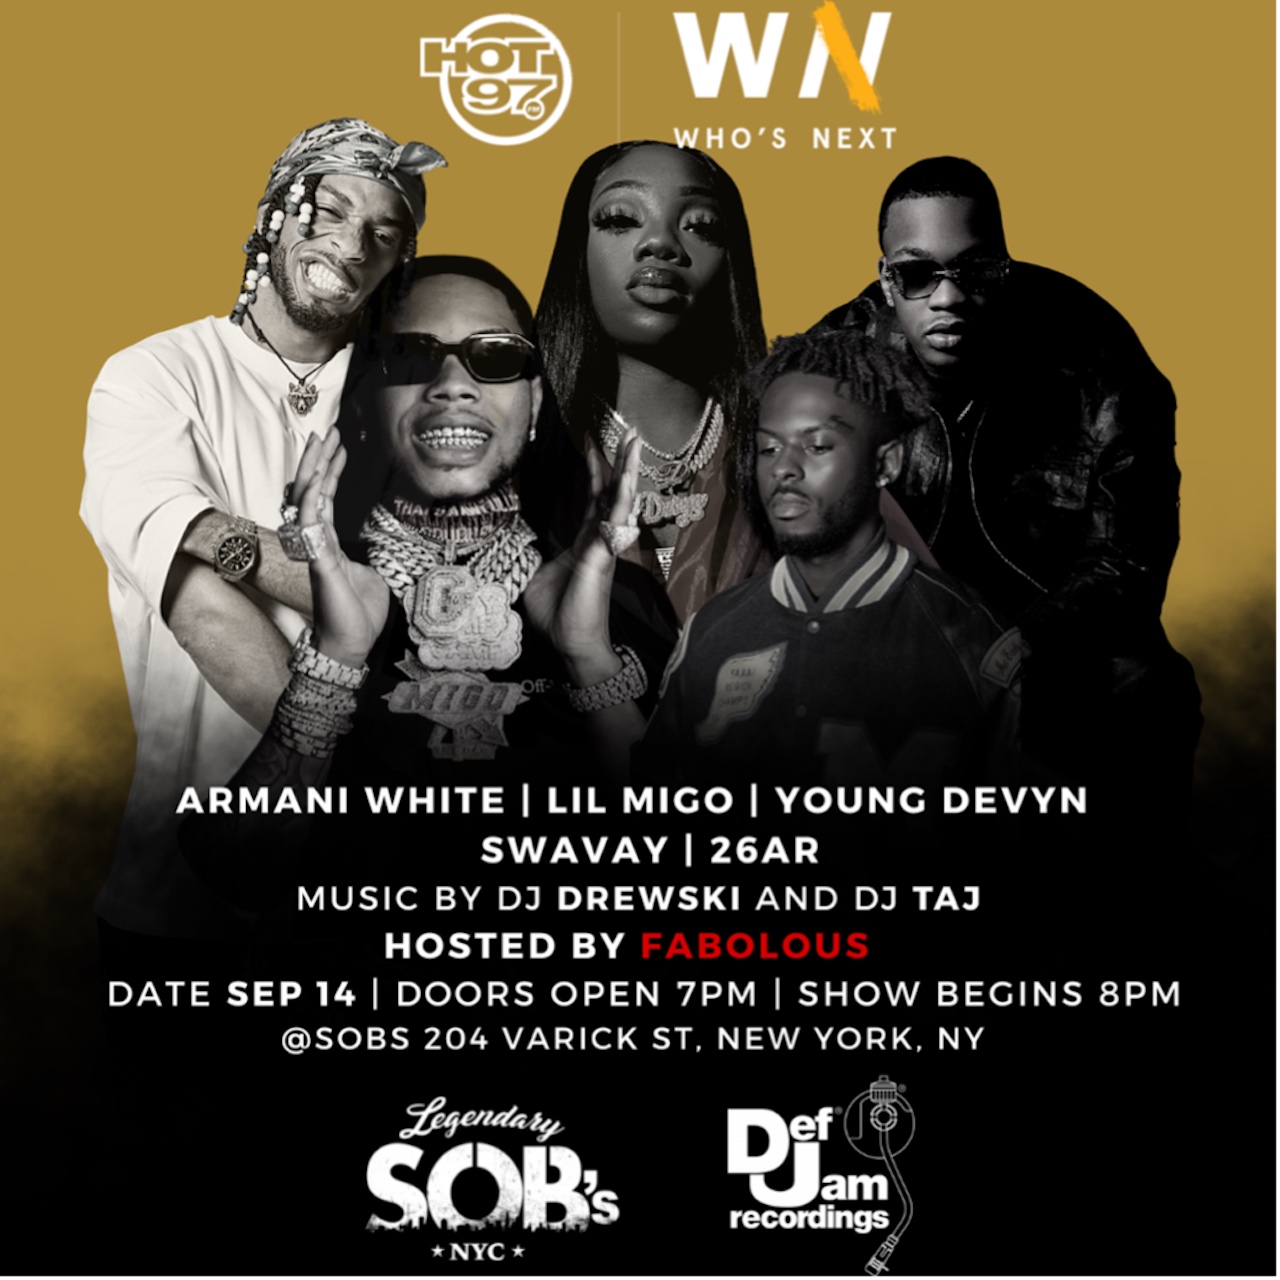 Def Jam And 4th & B'Way Team Up With Hot 97 For 'Who's Next